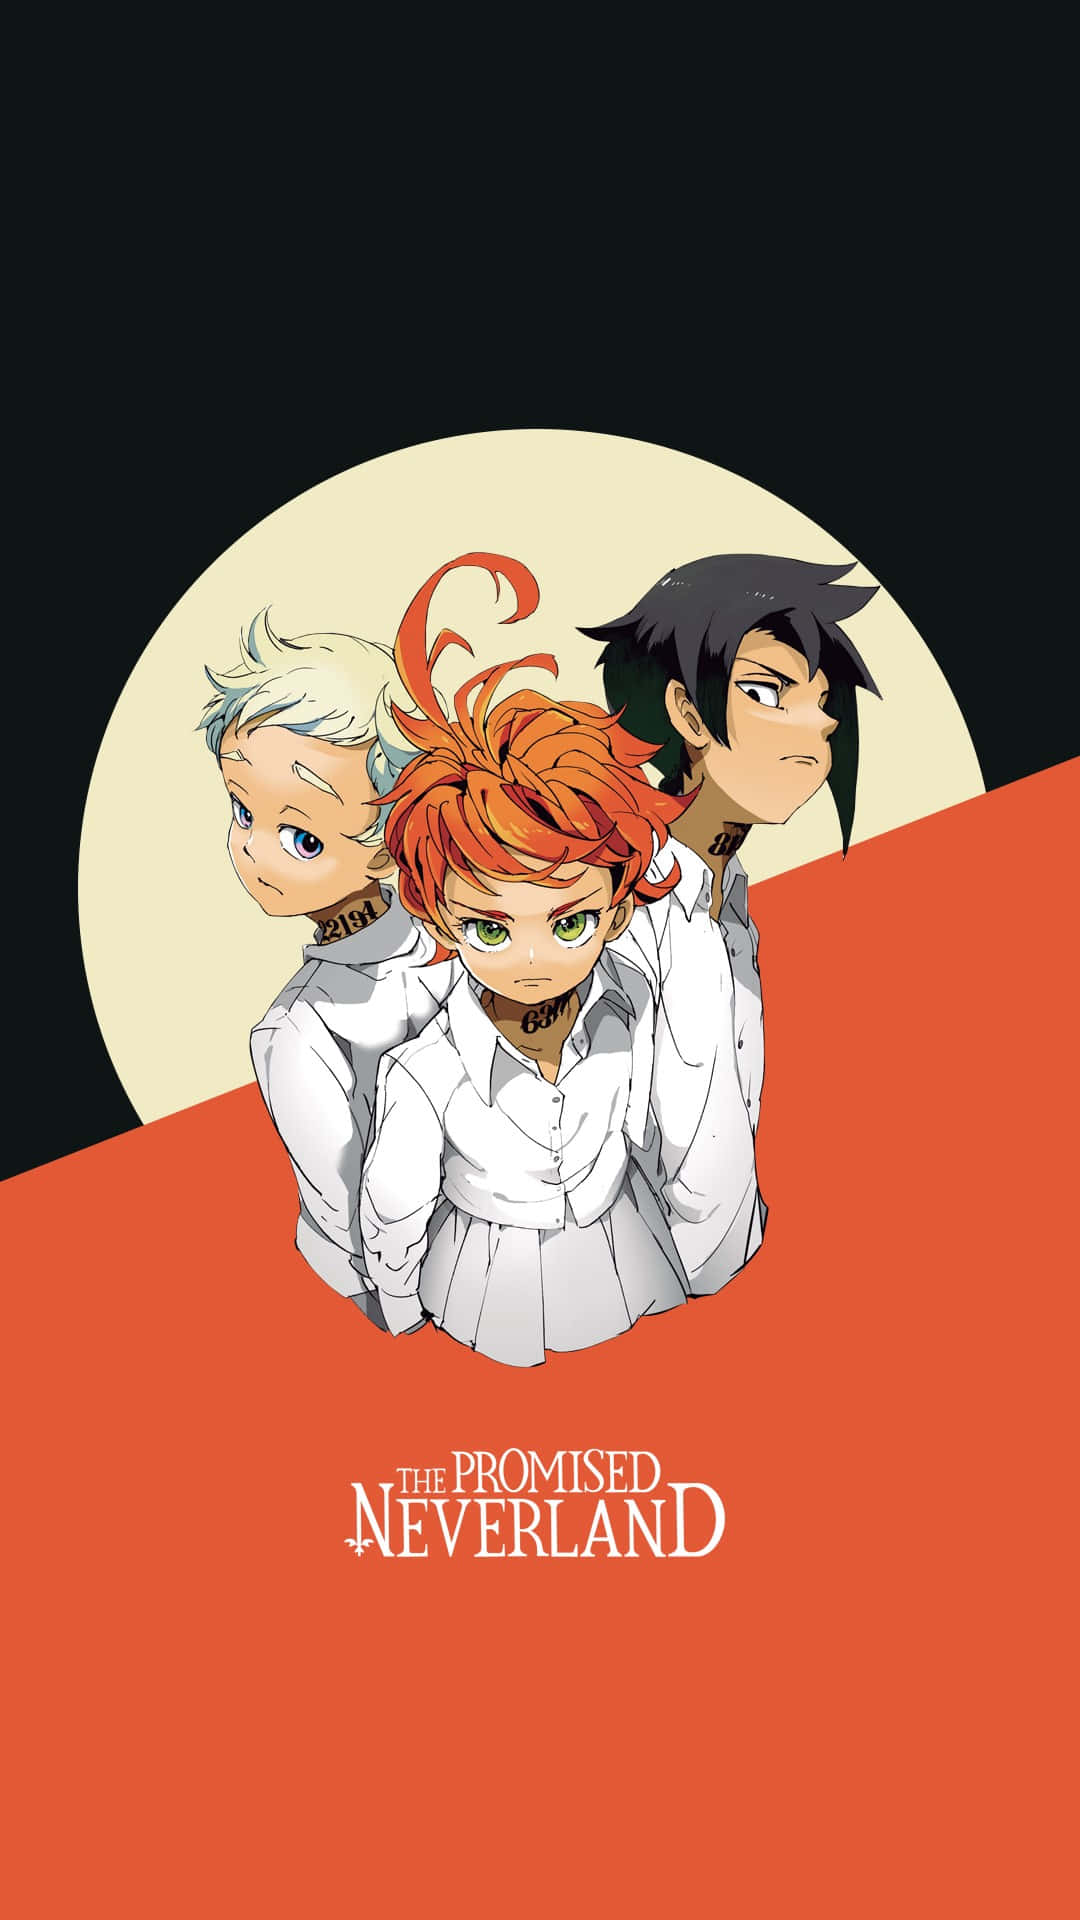 Wallpaper : The promised neverland, anime boys 1920x1080 - LongLife -  1604493 - HD Wallpapers - WallHere